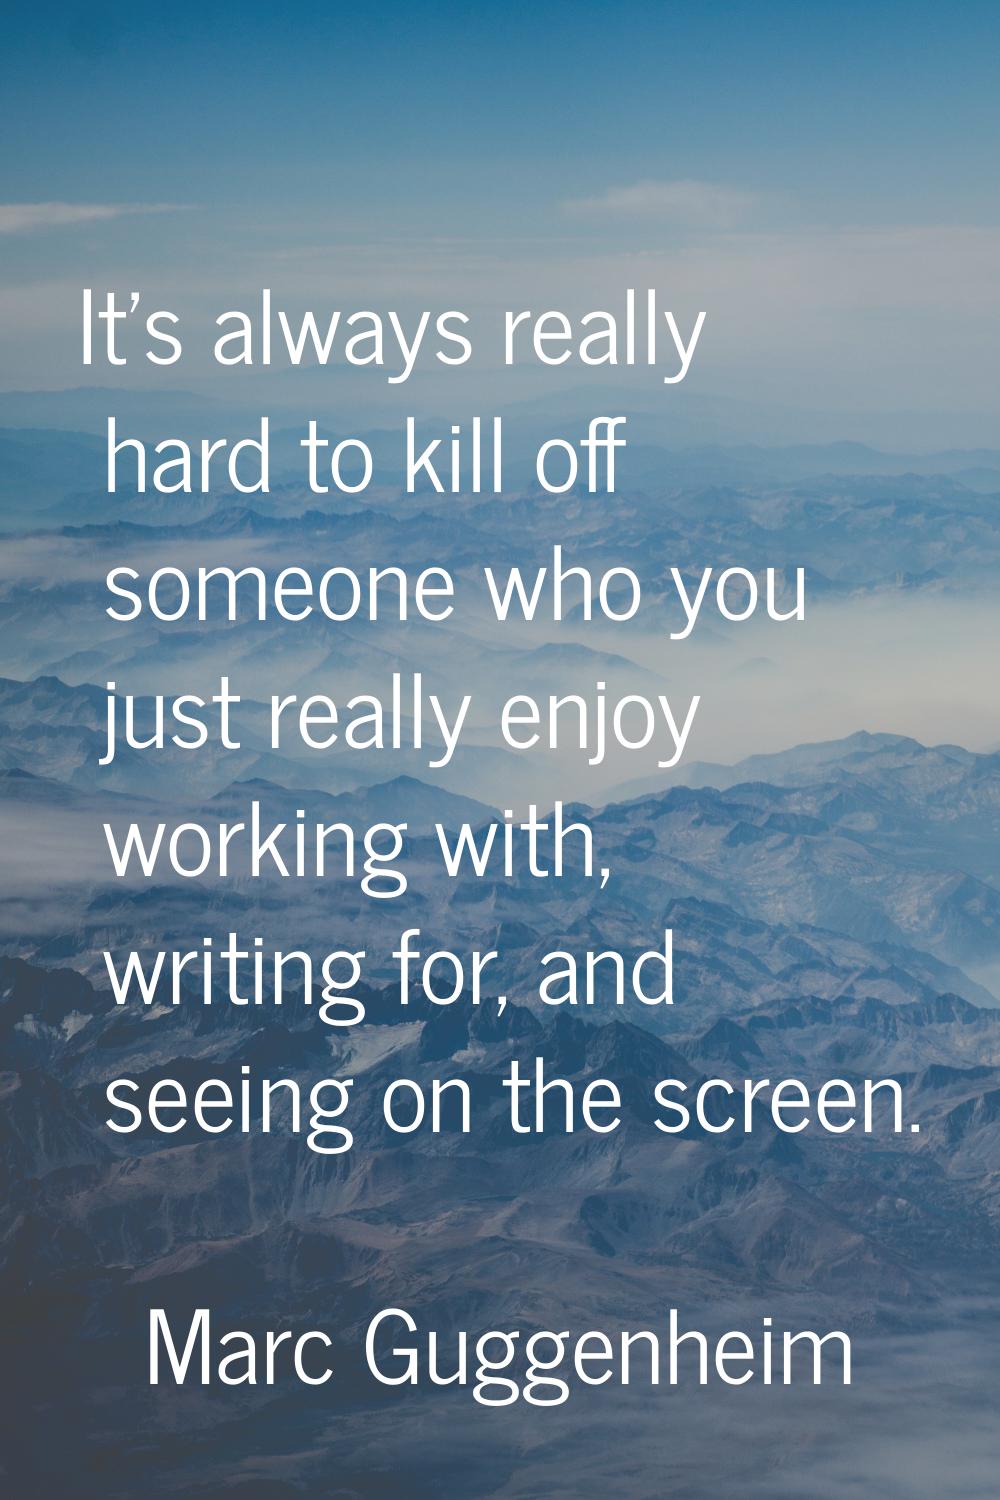 It's always really hard to kill off someone who you just really enjoy working with, writing for, an